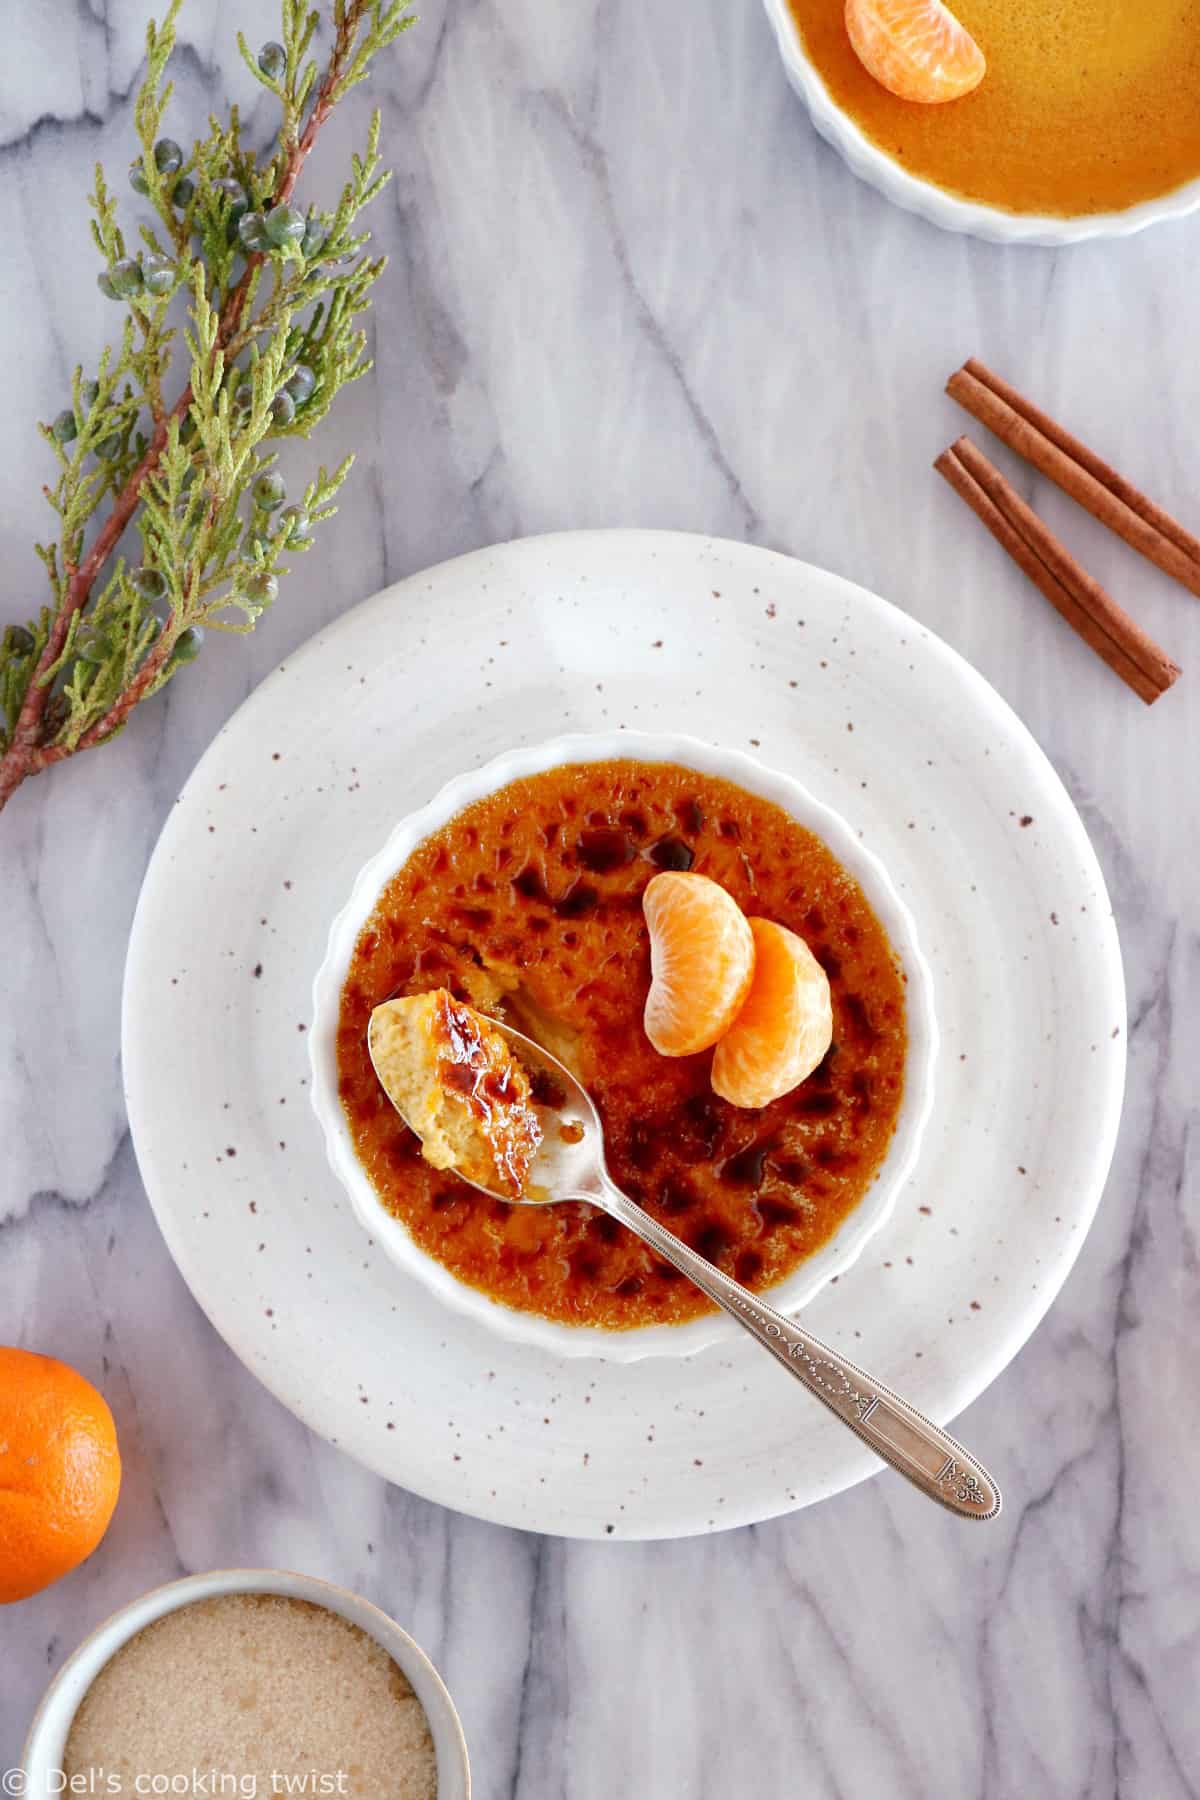 Try my easy pumpkin crème brûlée, so delicious you'll want to eat it year-round. It has a smooth and creamy pumpkin custard filling, warm spices and the characteristic caramelized sugar topping.